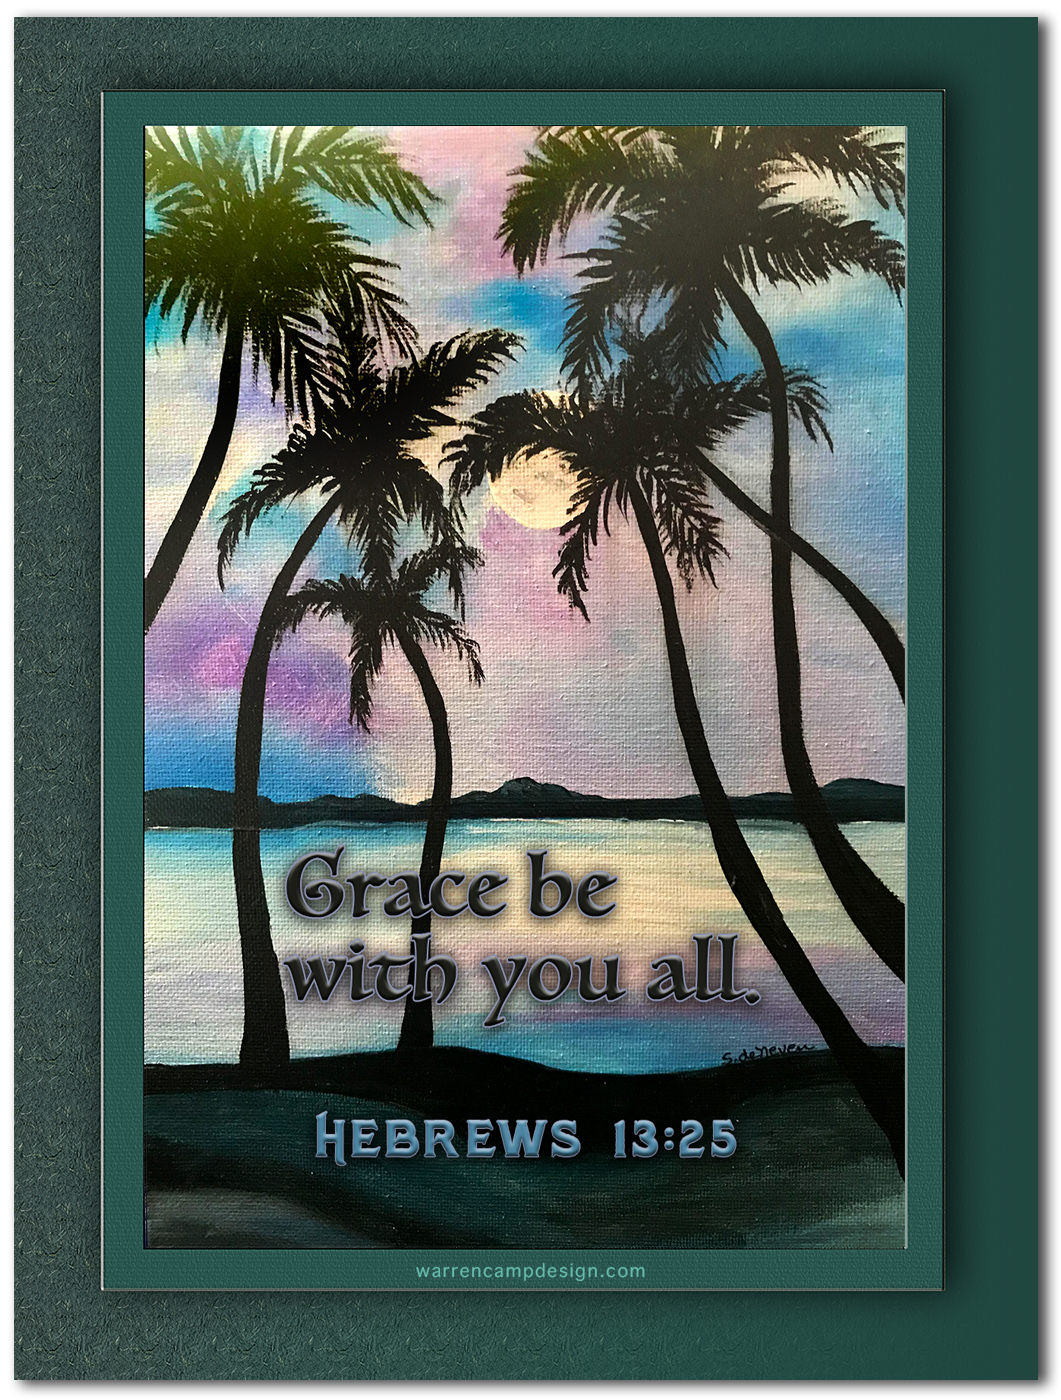 Scripture picture of Hebrews 13:25, highlighting the closing grace-filled benediction of 'Hebrews.'